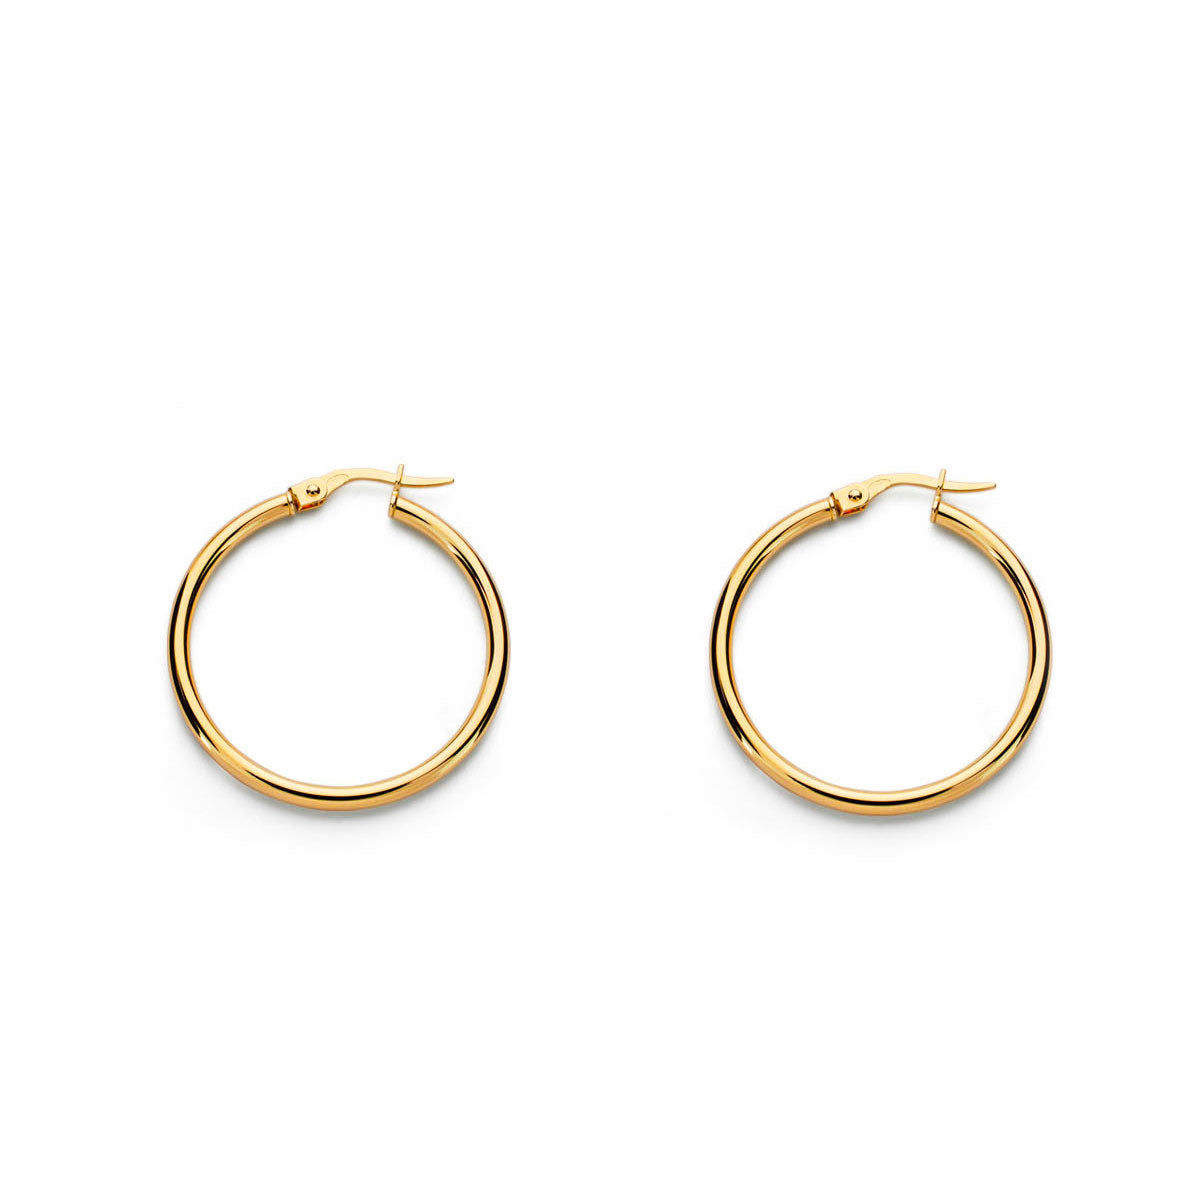 9K Yellow Gold Earrings Round Shiny Hoops 33 x 1.5 mm